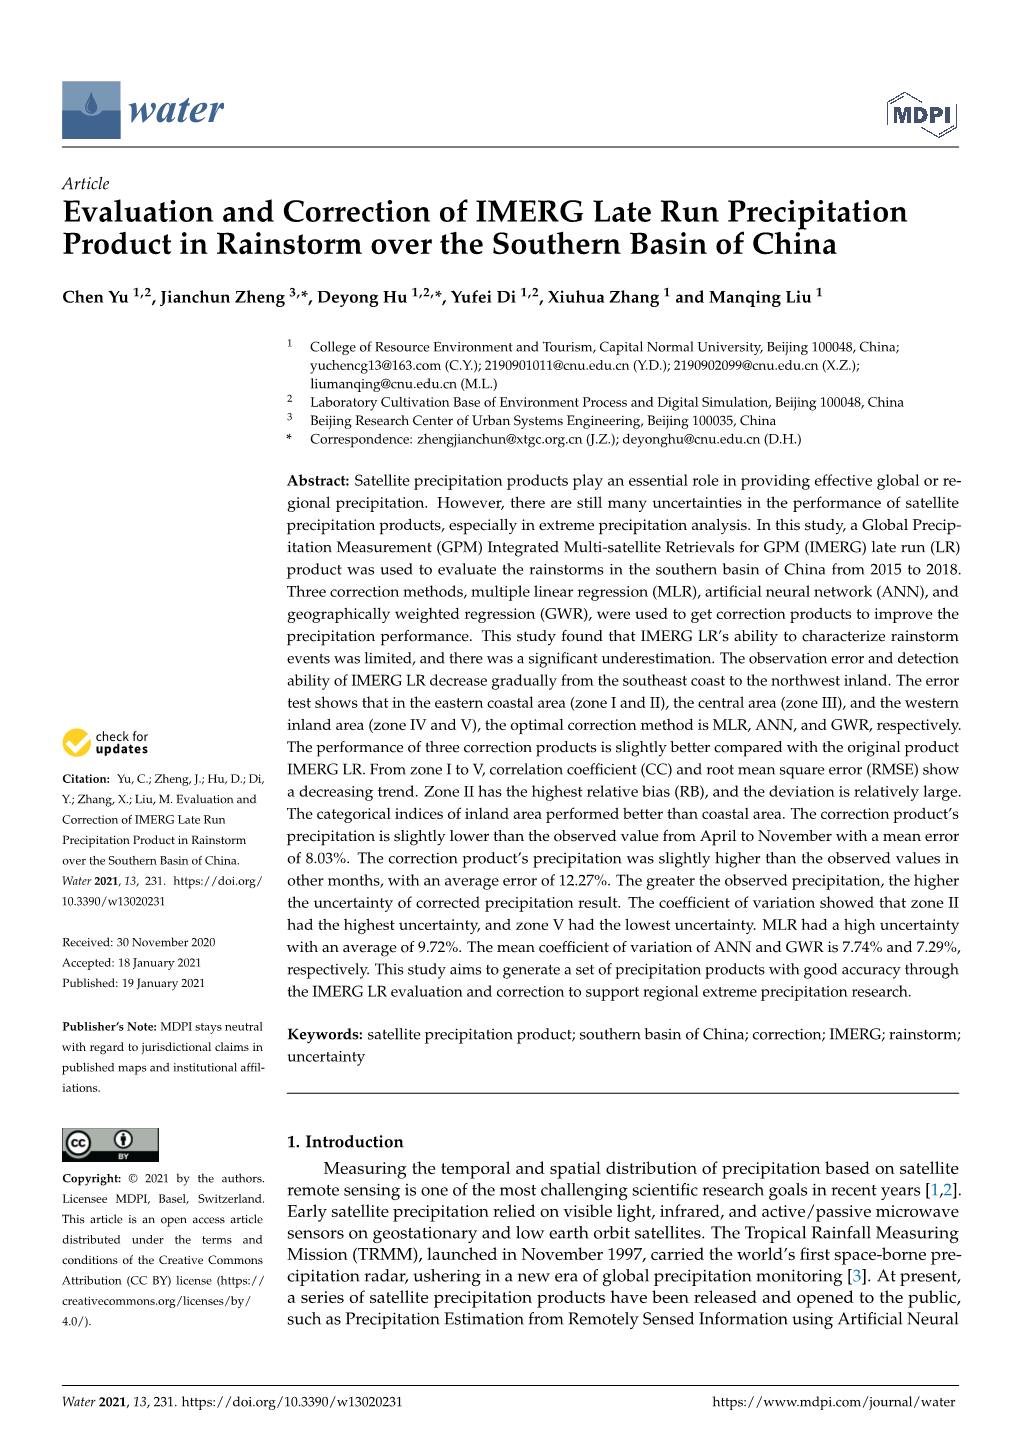 Evaluation and Correction of IMERG Late Run Precipitation Product in Rainstorm Over the Southern Basin of China